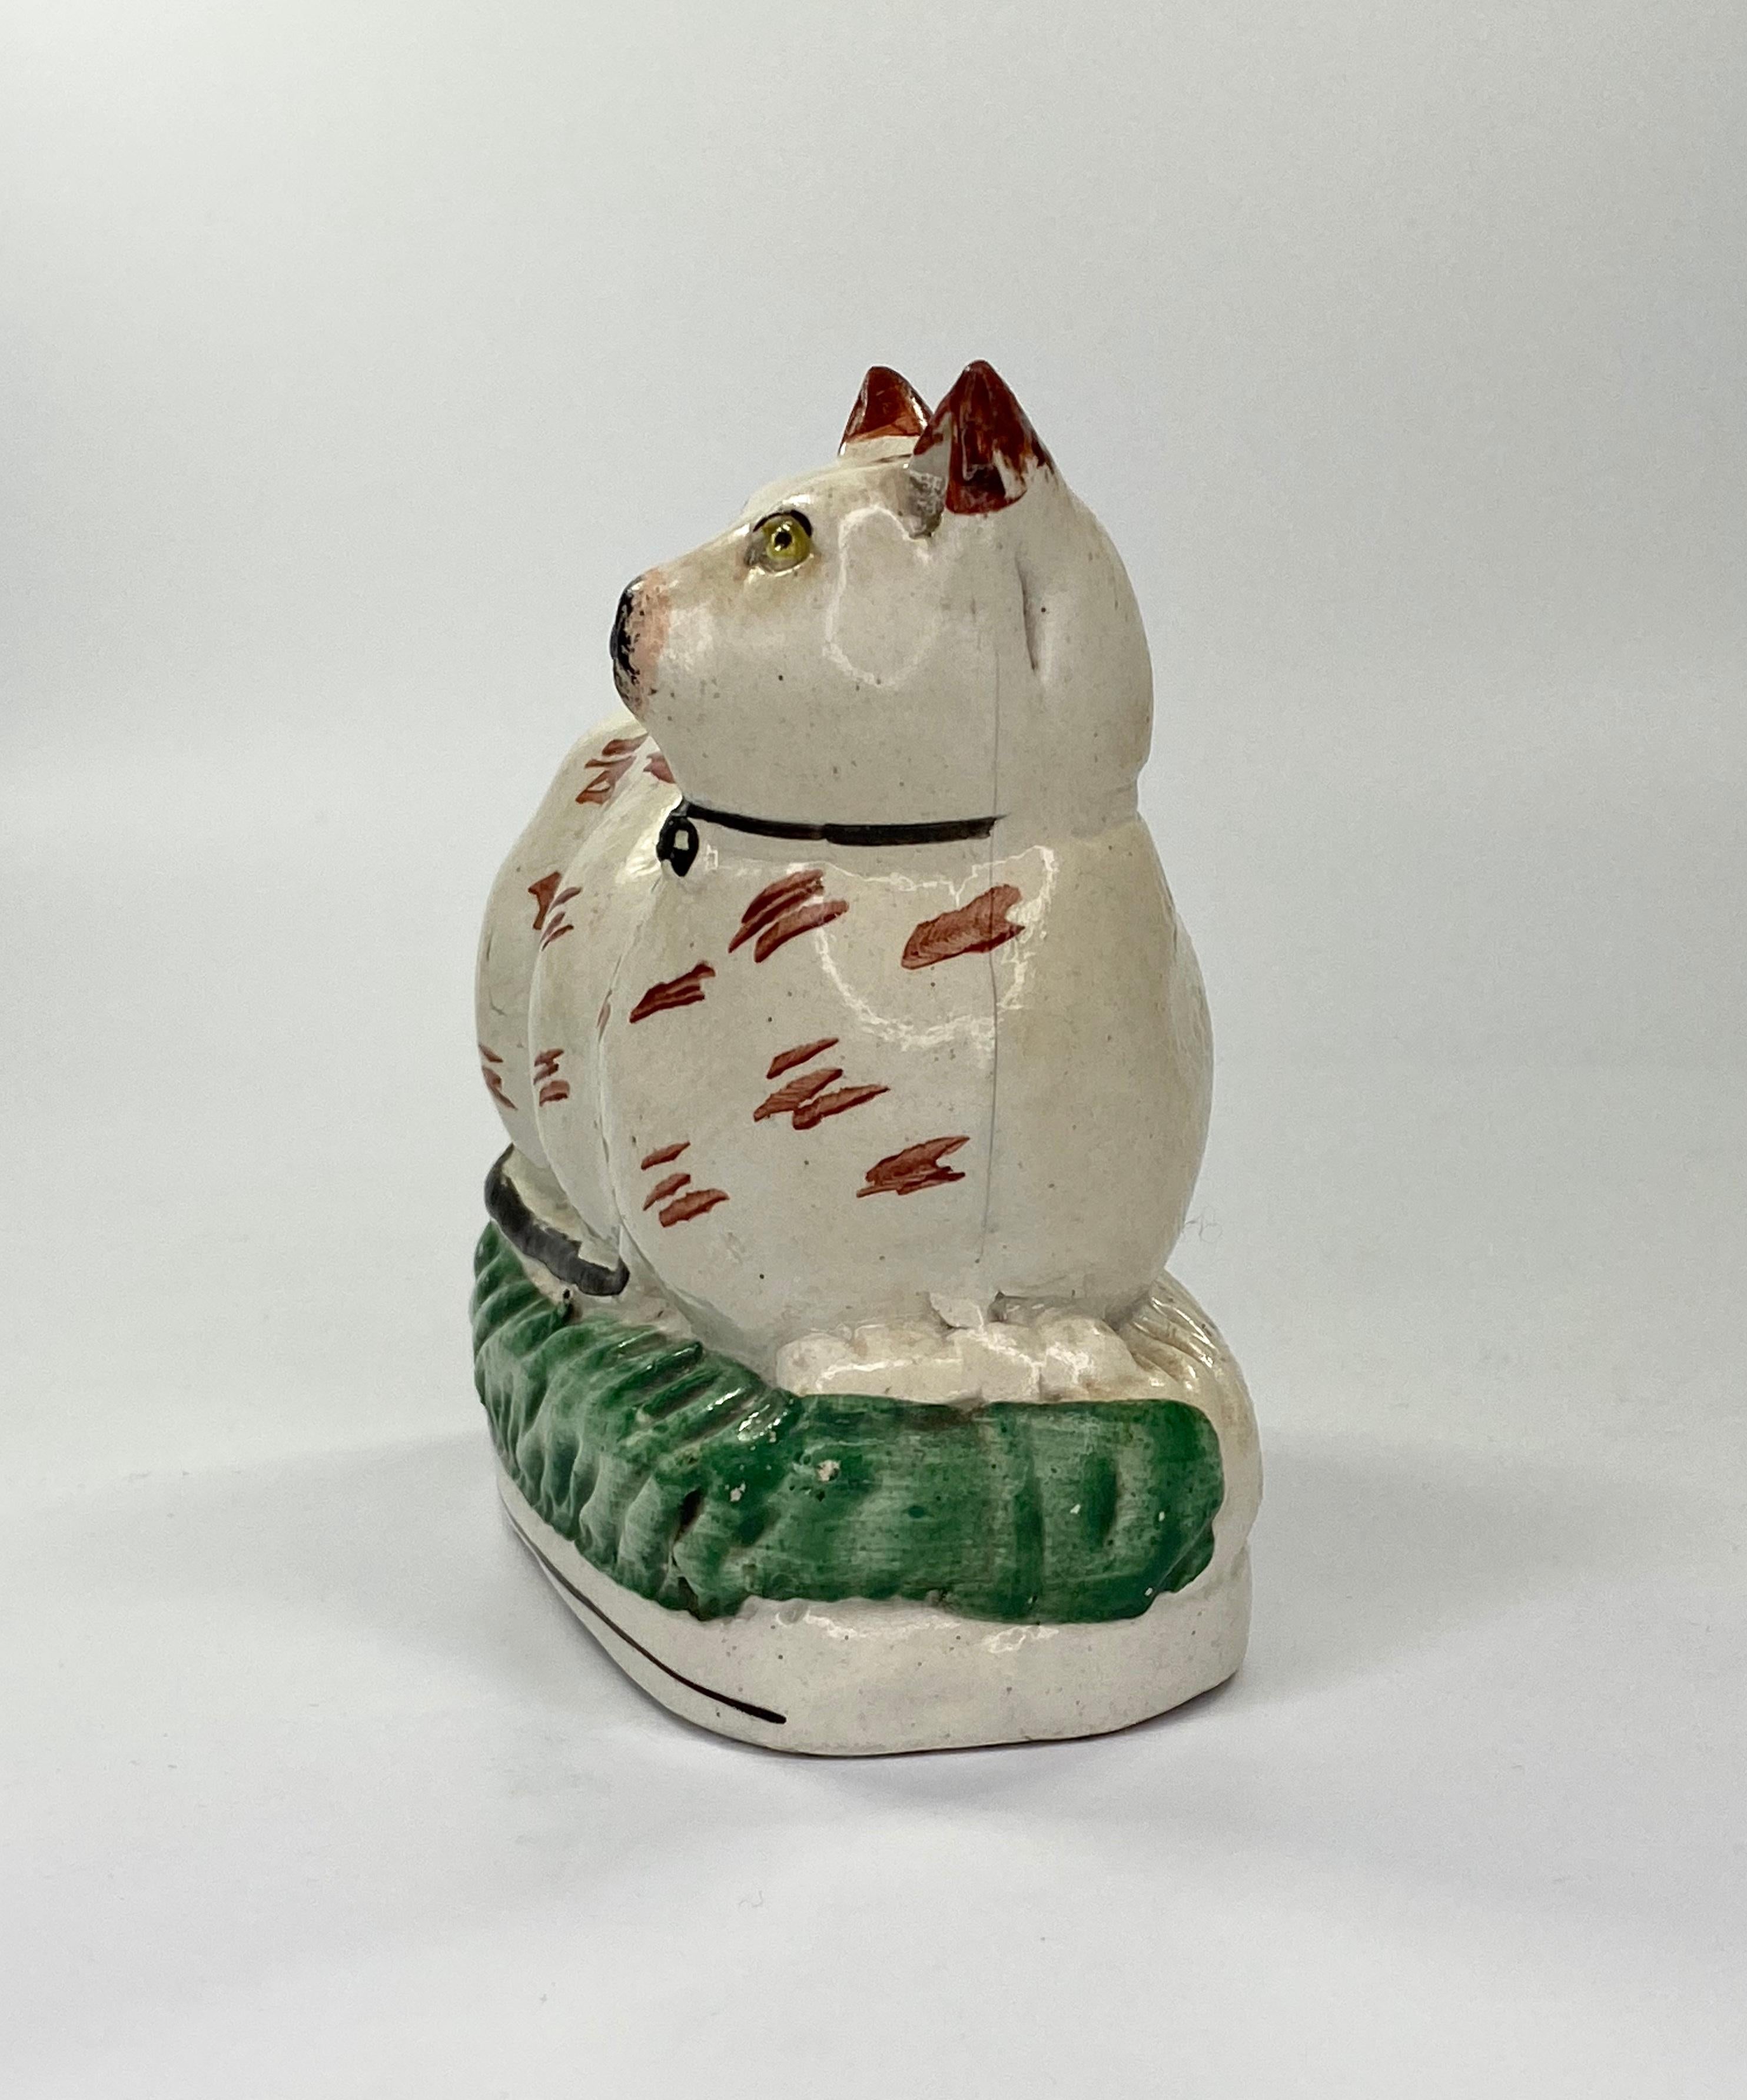 Fired Staffordshire Pottery Cat, circa 1860